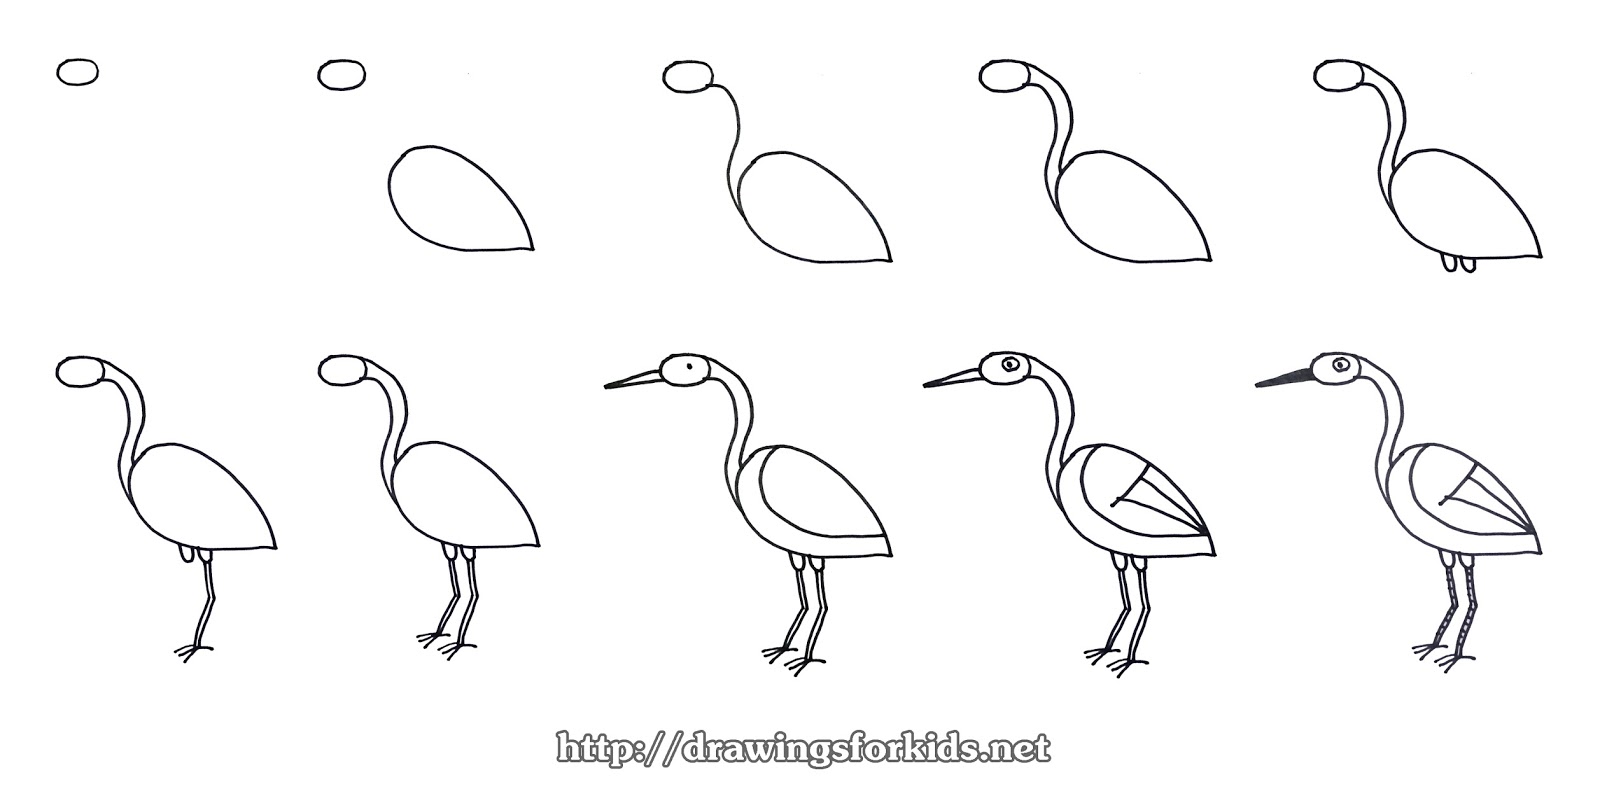 How To Draw A Stork For Kids - Drawingsforkids.Net